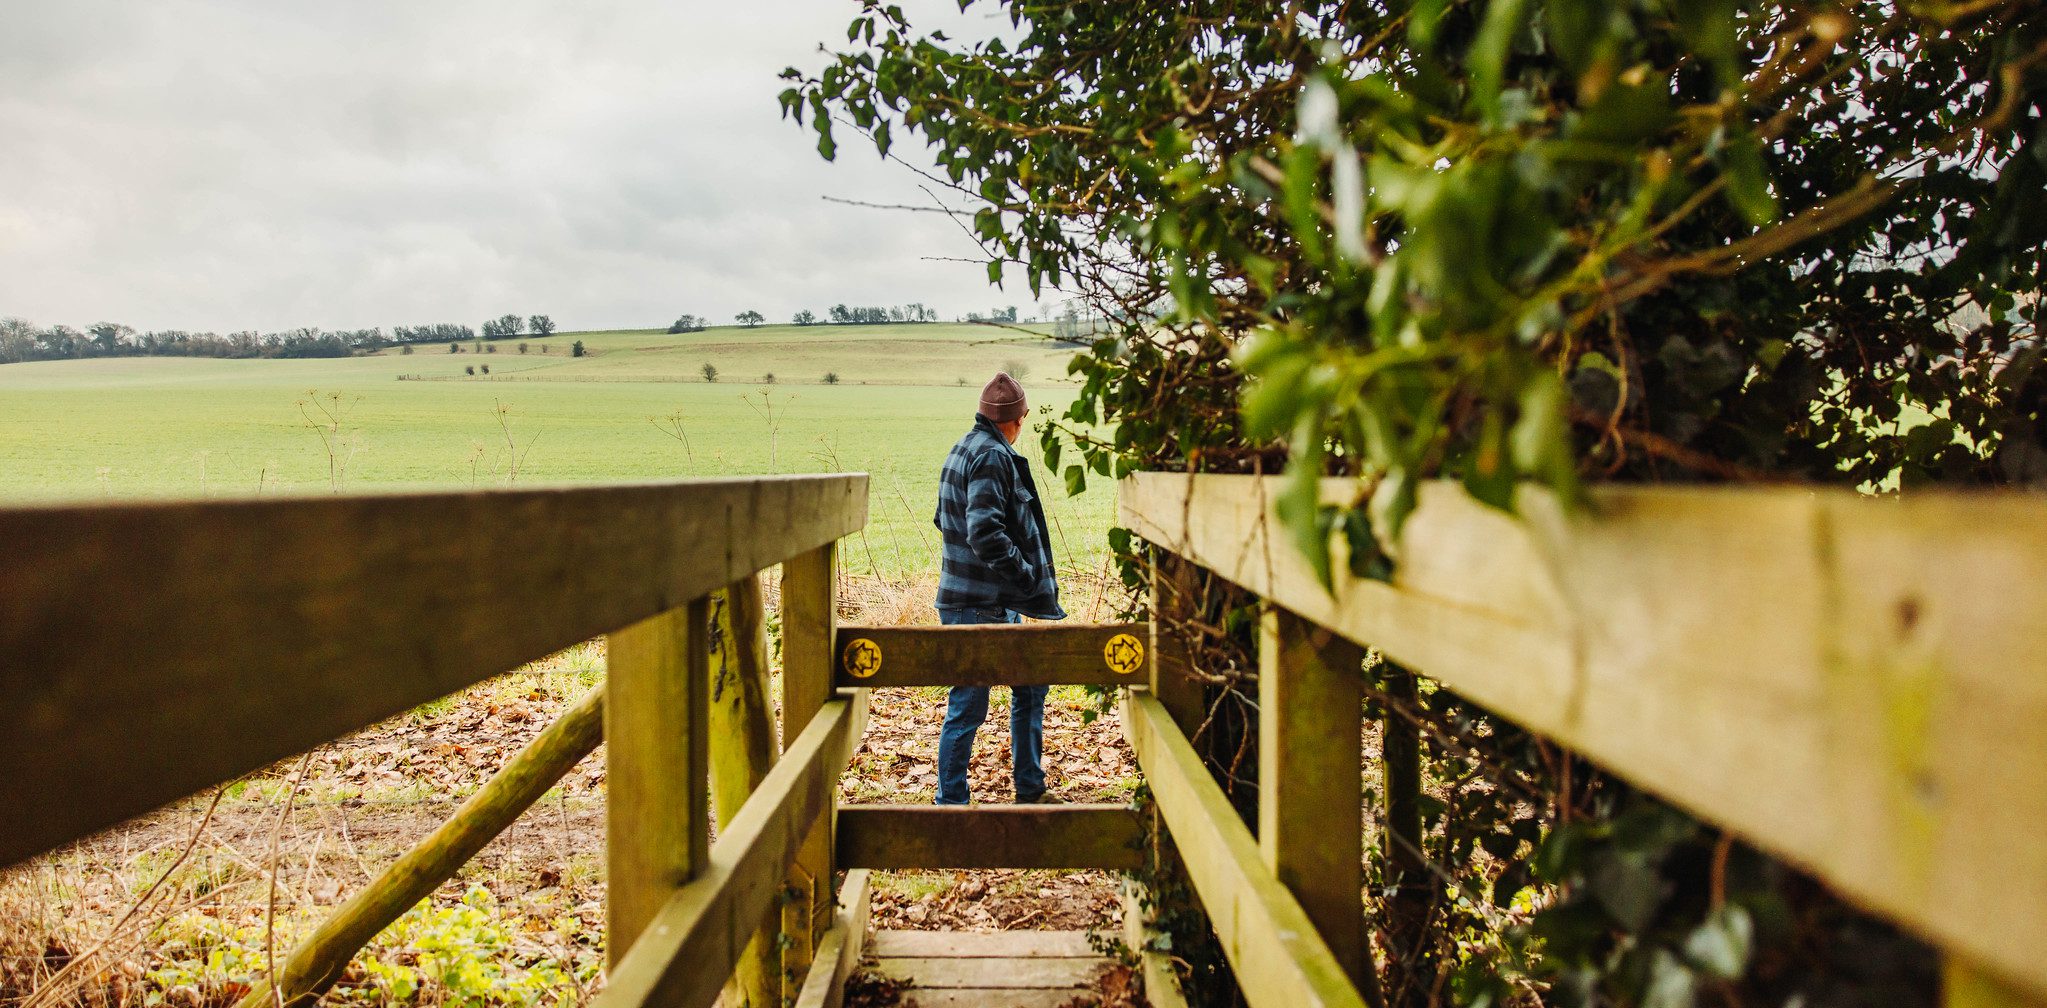 Man looking at countryside by stile